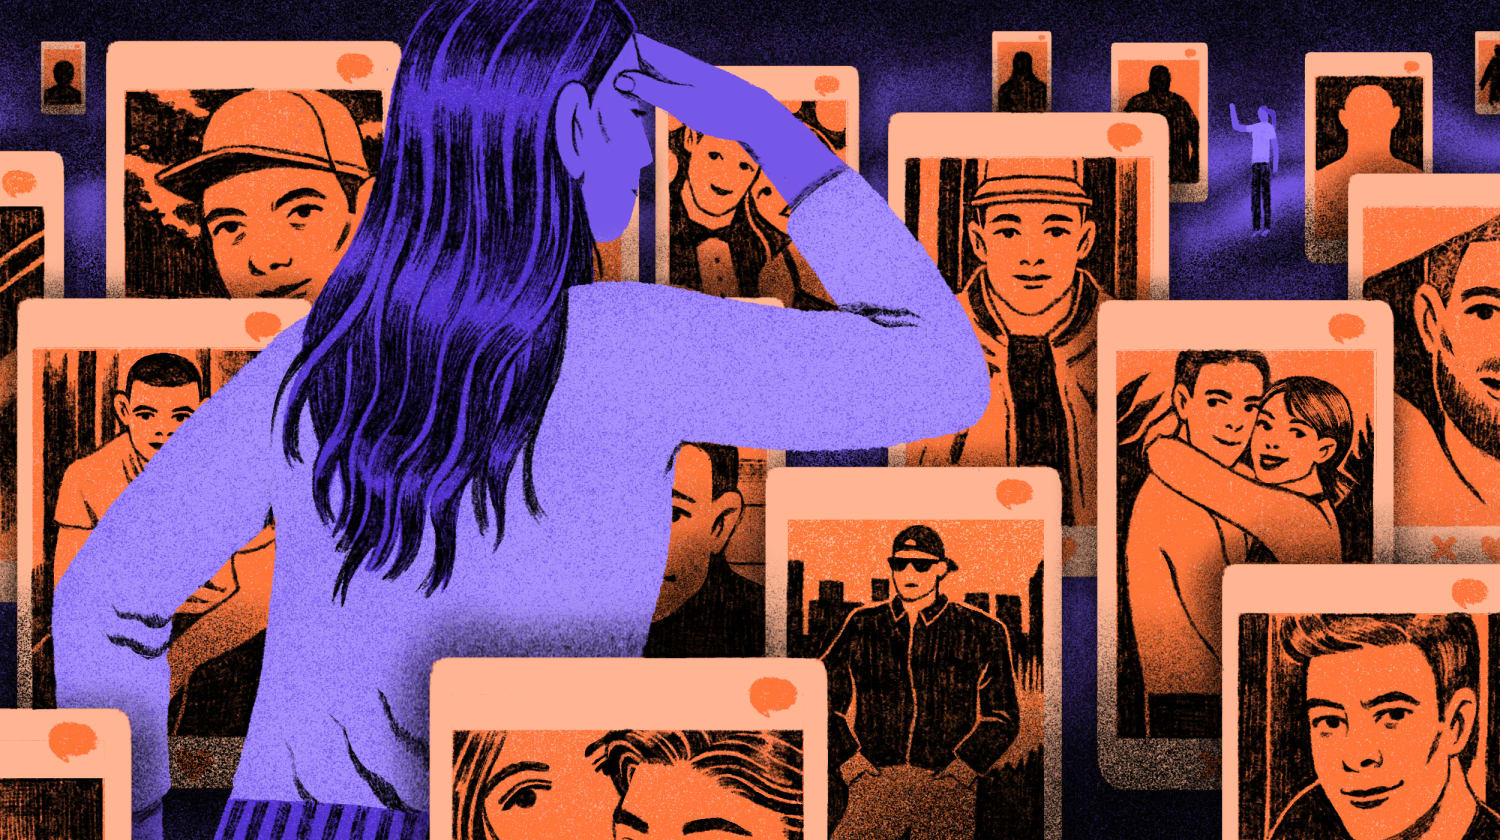 Would You Go On a Crazy Blind Date? OK Cupid Thinks So